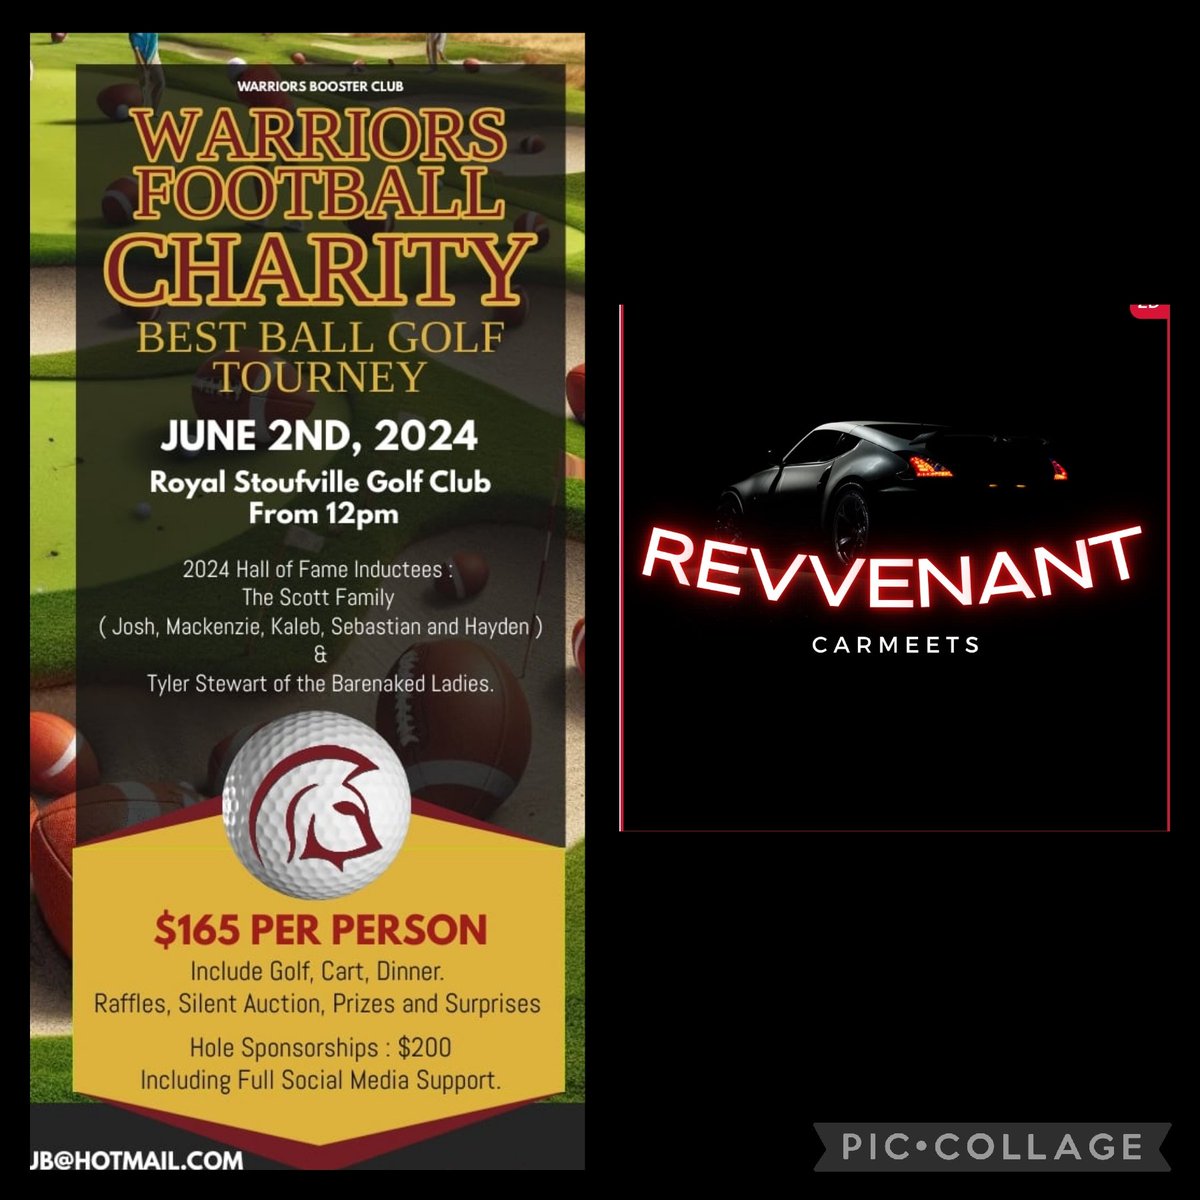 SPONSORSHIP ⚠️ Big thank you to the Revvenant Car-Meets for the sponsorship! Revvenant Car-Meets bring the Fast & Furious to life! Who's next? We still need 89 golfers, let's go! Contact: warriorsfootballboosterclub@hotmail.com